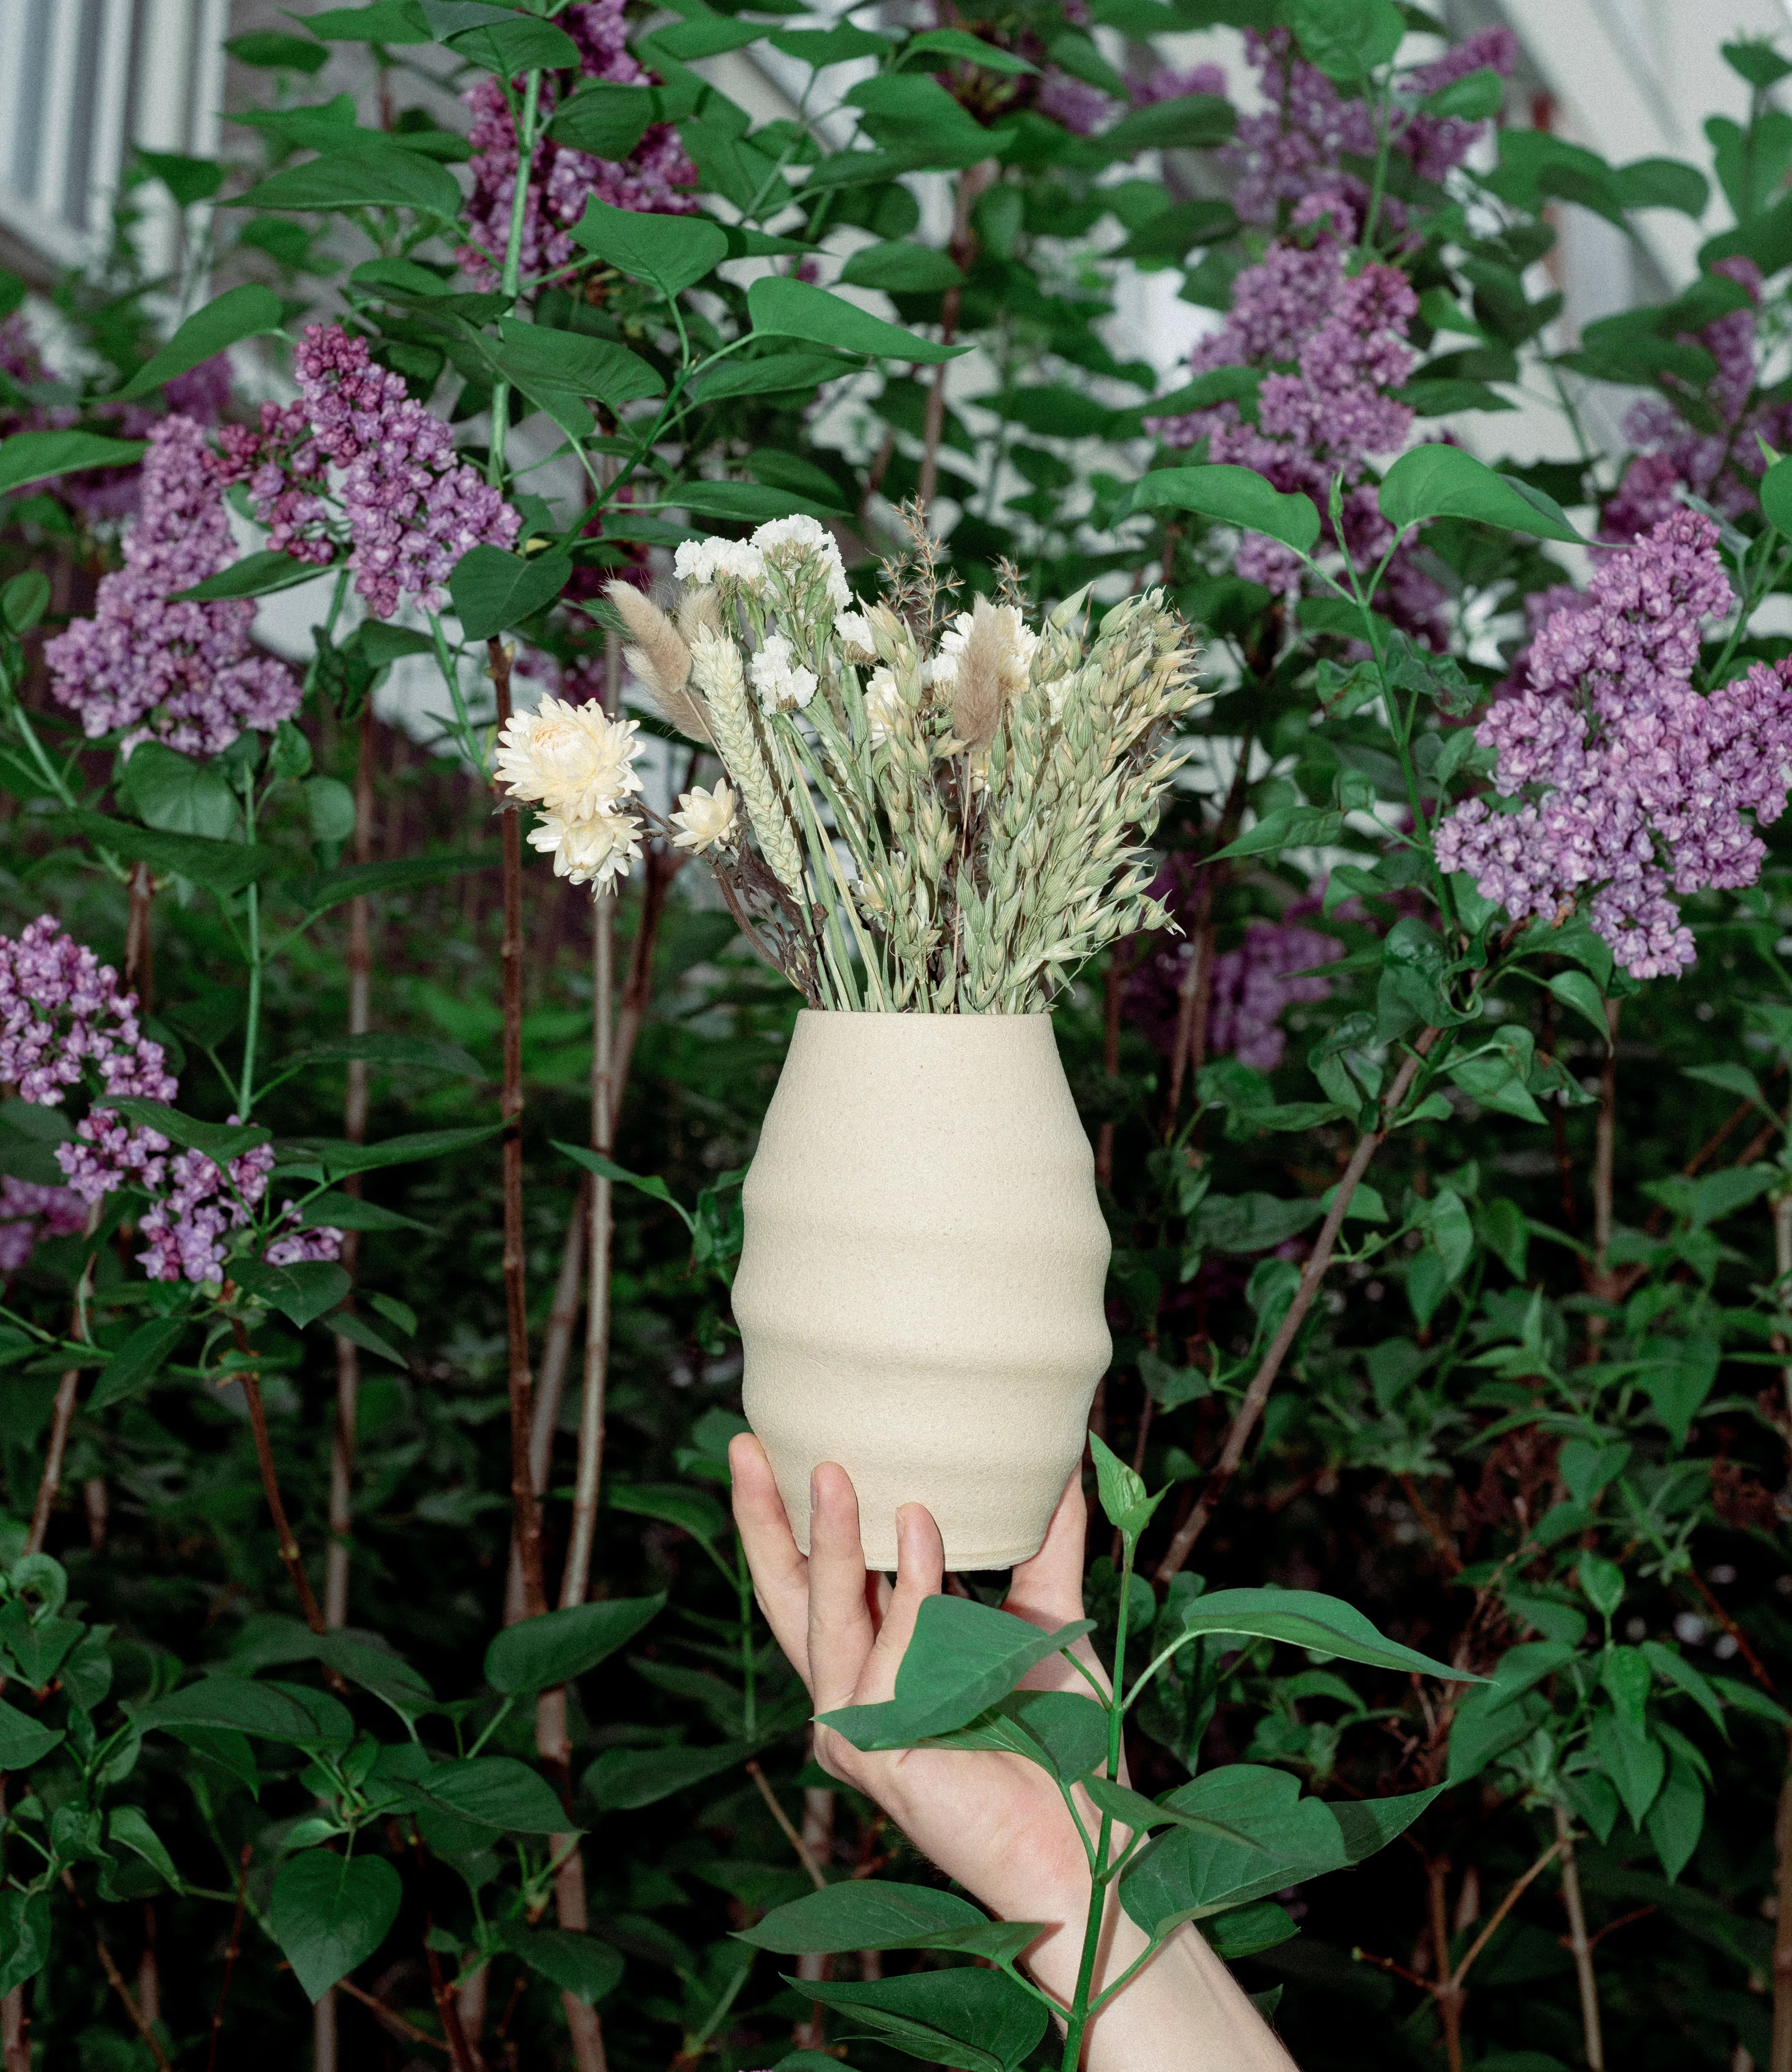 Ocactuu's Aonia Vase paired with Dried flowers coming in a natural tone. The product is showcased in a garden with lilac flowers in the background.